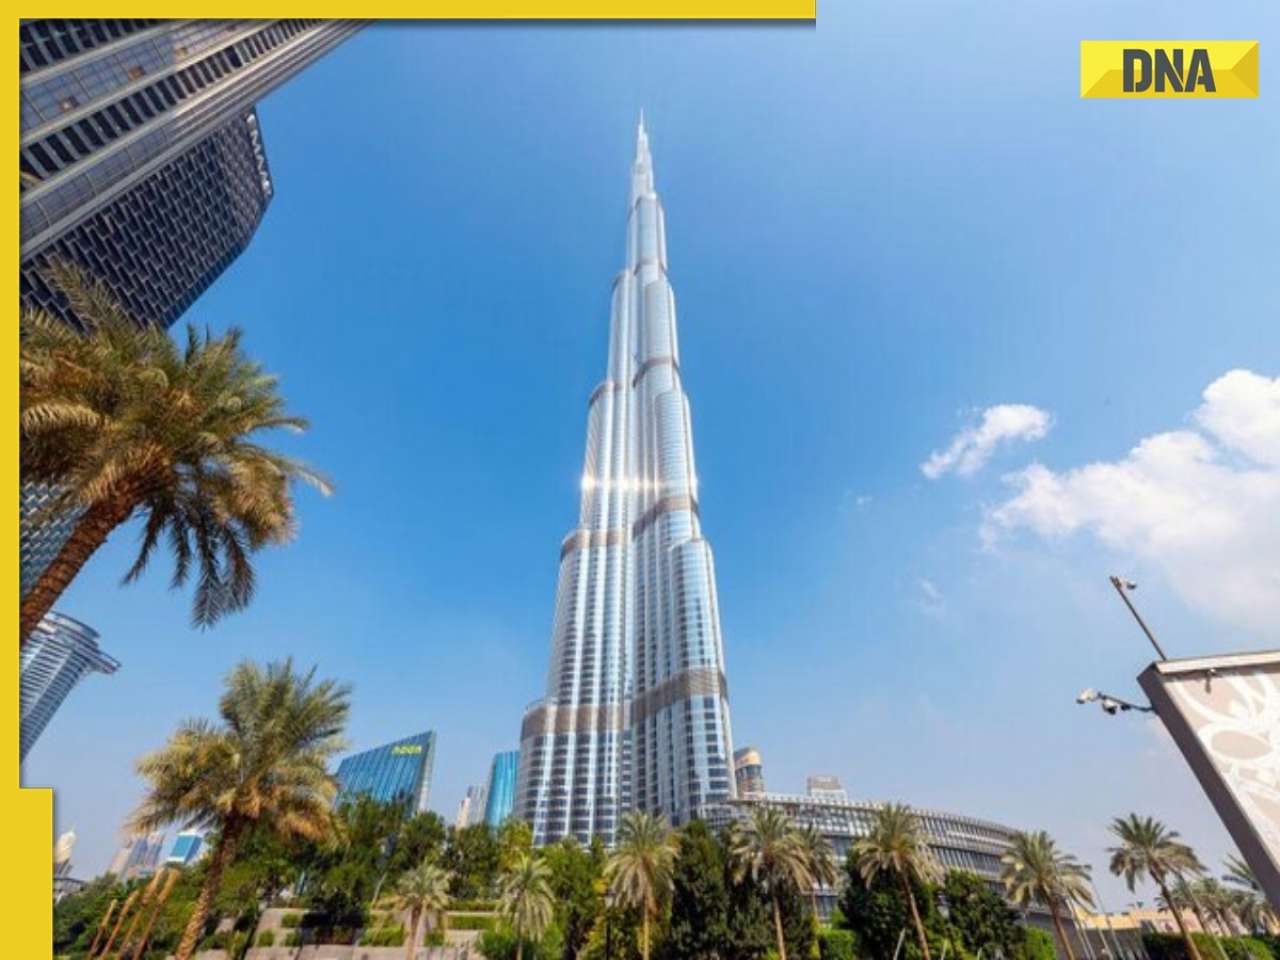 Who owns Dubai's Burj Khalifa and which company built it? Check interesting facts about world's tallest building